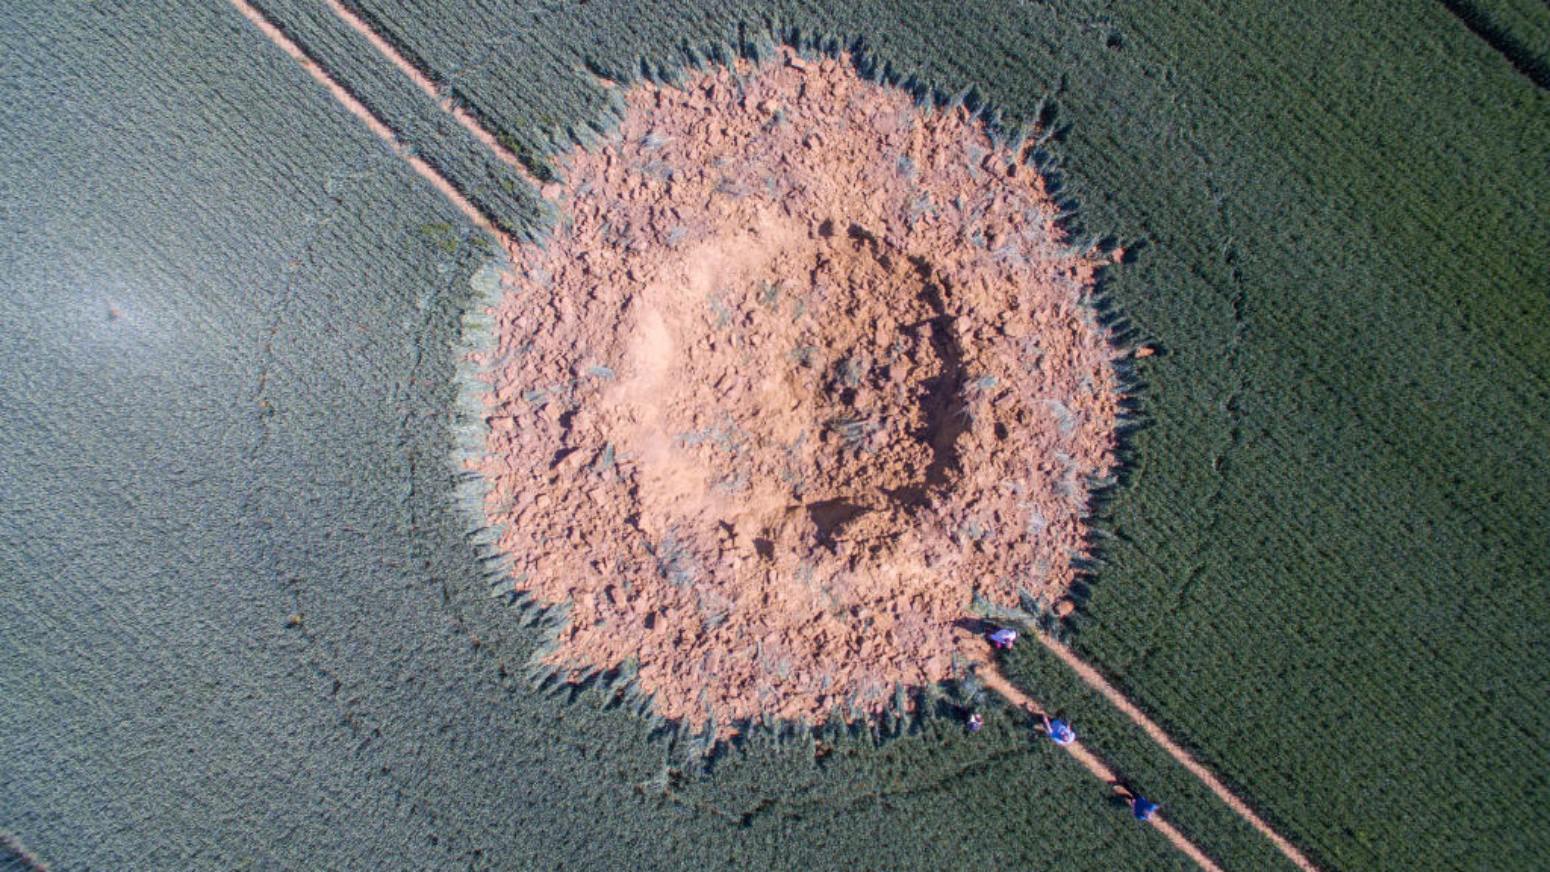 Drone photo shows crater WWII bomb explosion in Germany